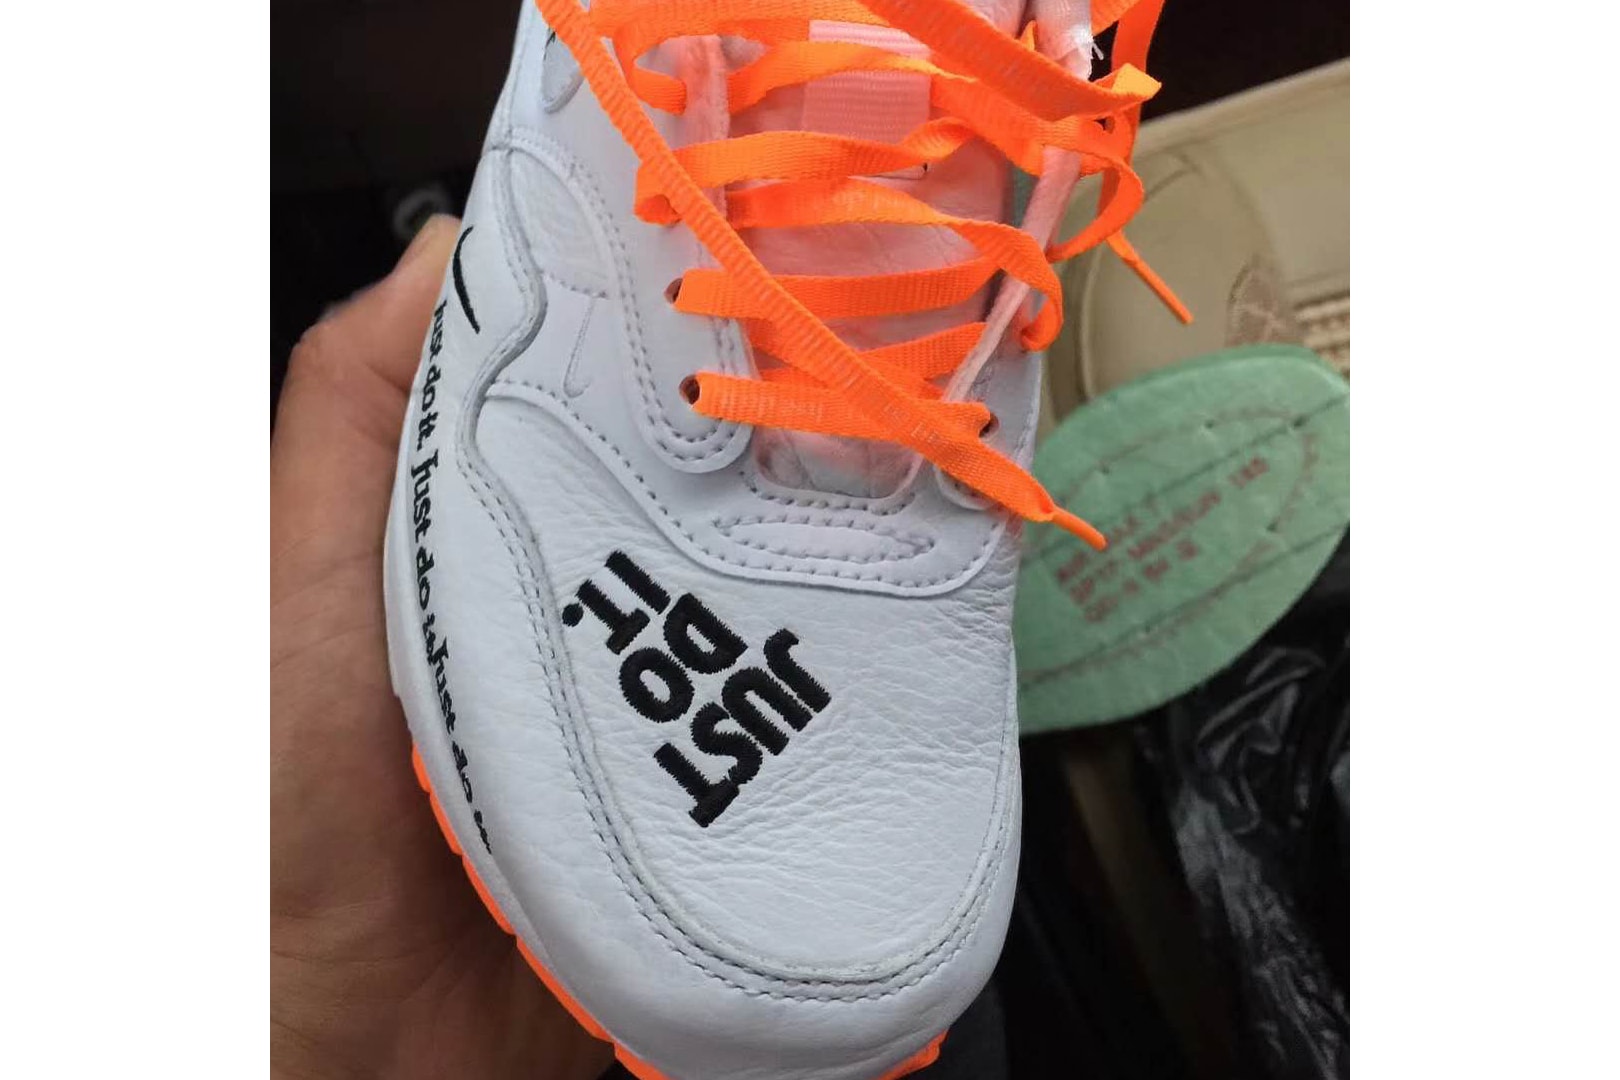 Nike Air Max 1 "Just Do It" 2018 collection First Look leak women's men's sneaker